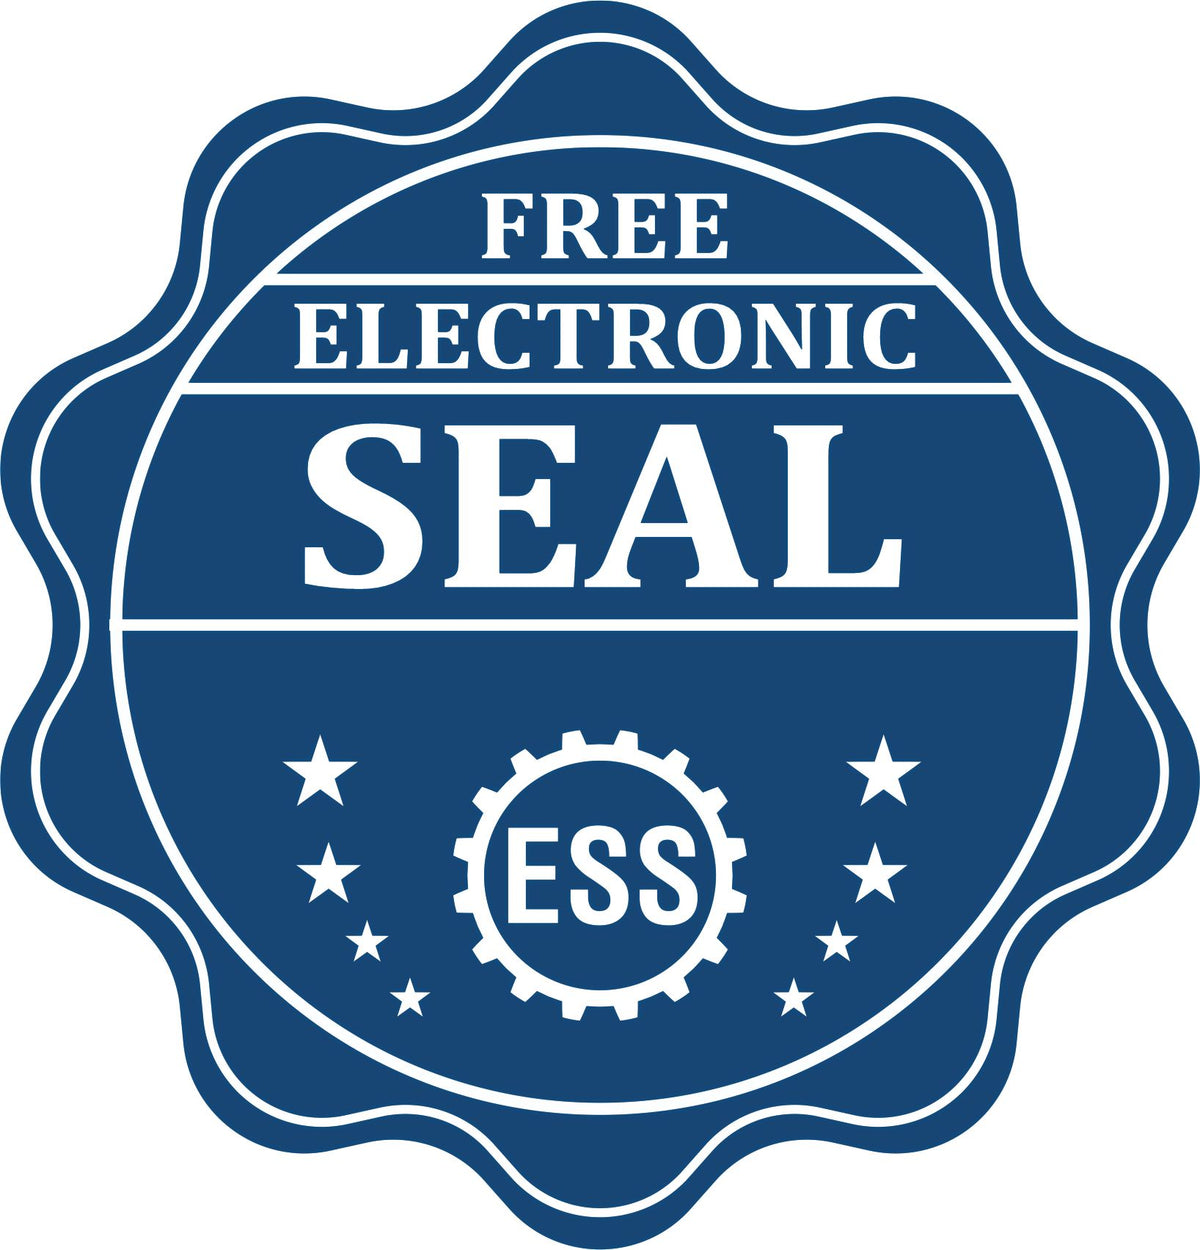 A badge showing a free electronic seal for the Hybrid West Virginia Architect Seal with stars and the ESS gear on the emblem.